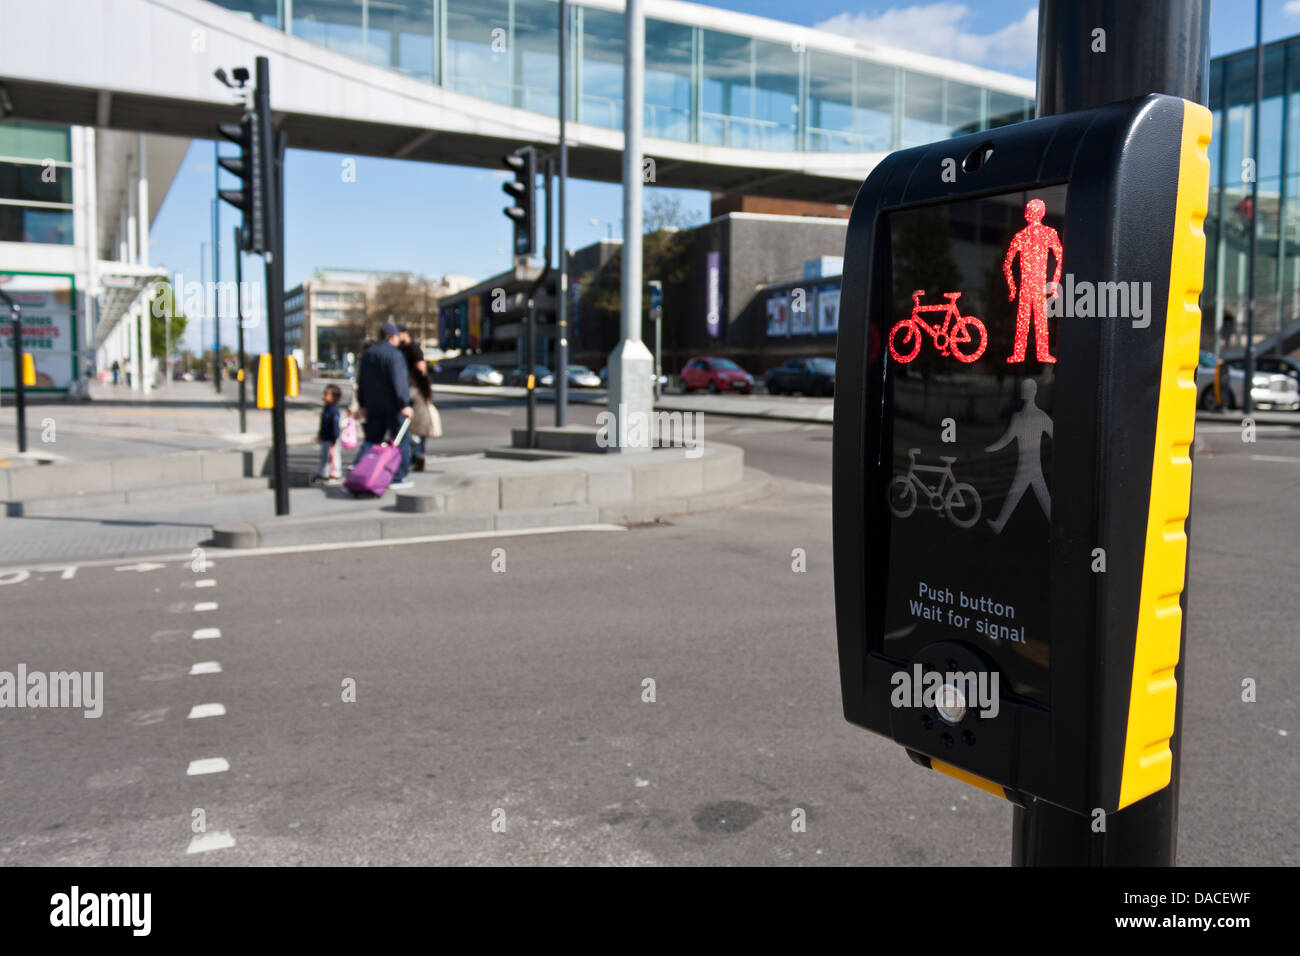 Pedestrian crossing control box displays red man icon after family have safely crossed road. Slough, Berkshire, England. Stock Photo